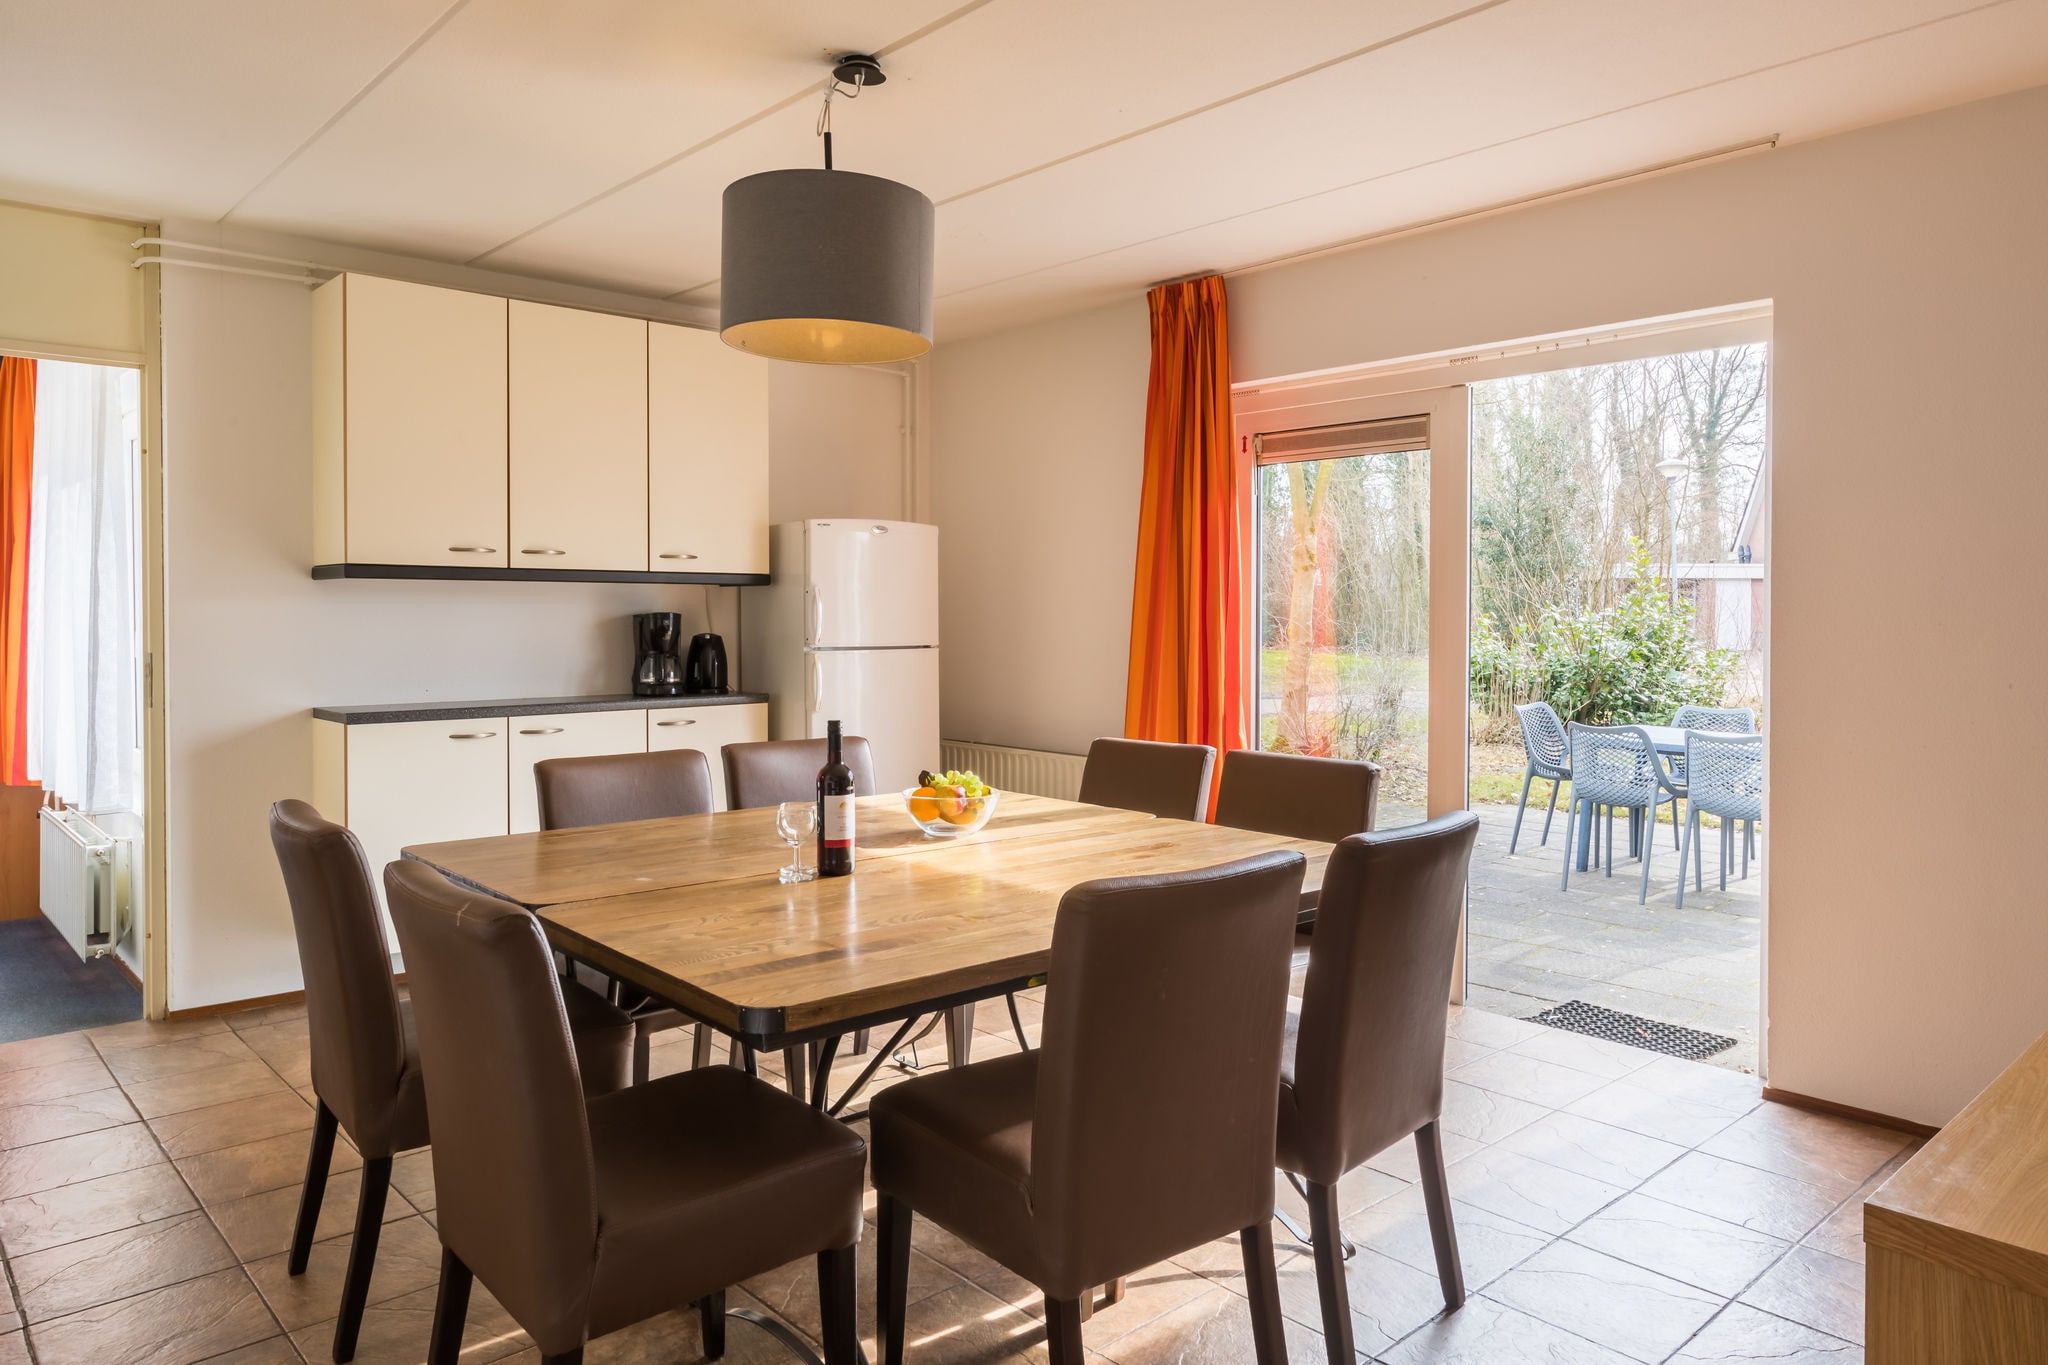 Spacious bungalow with dishwasher, near the Hunebedcentrum